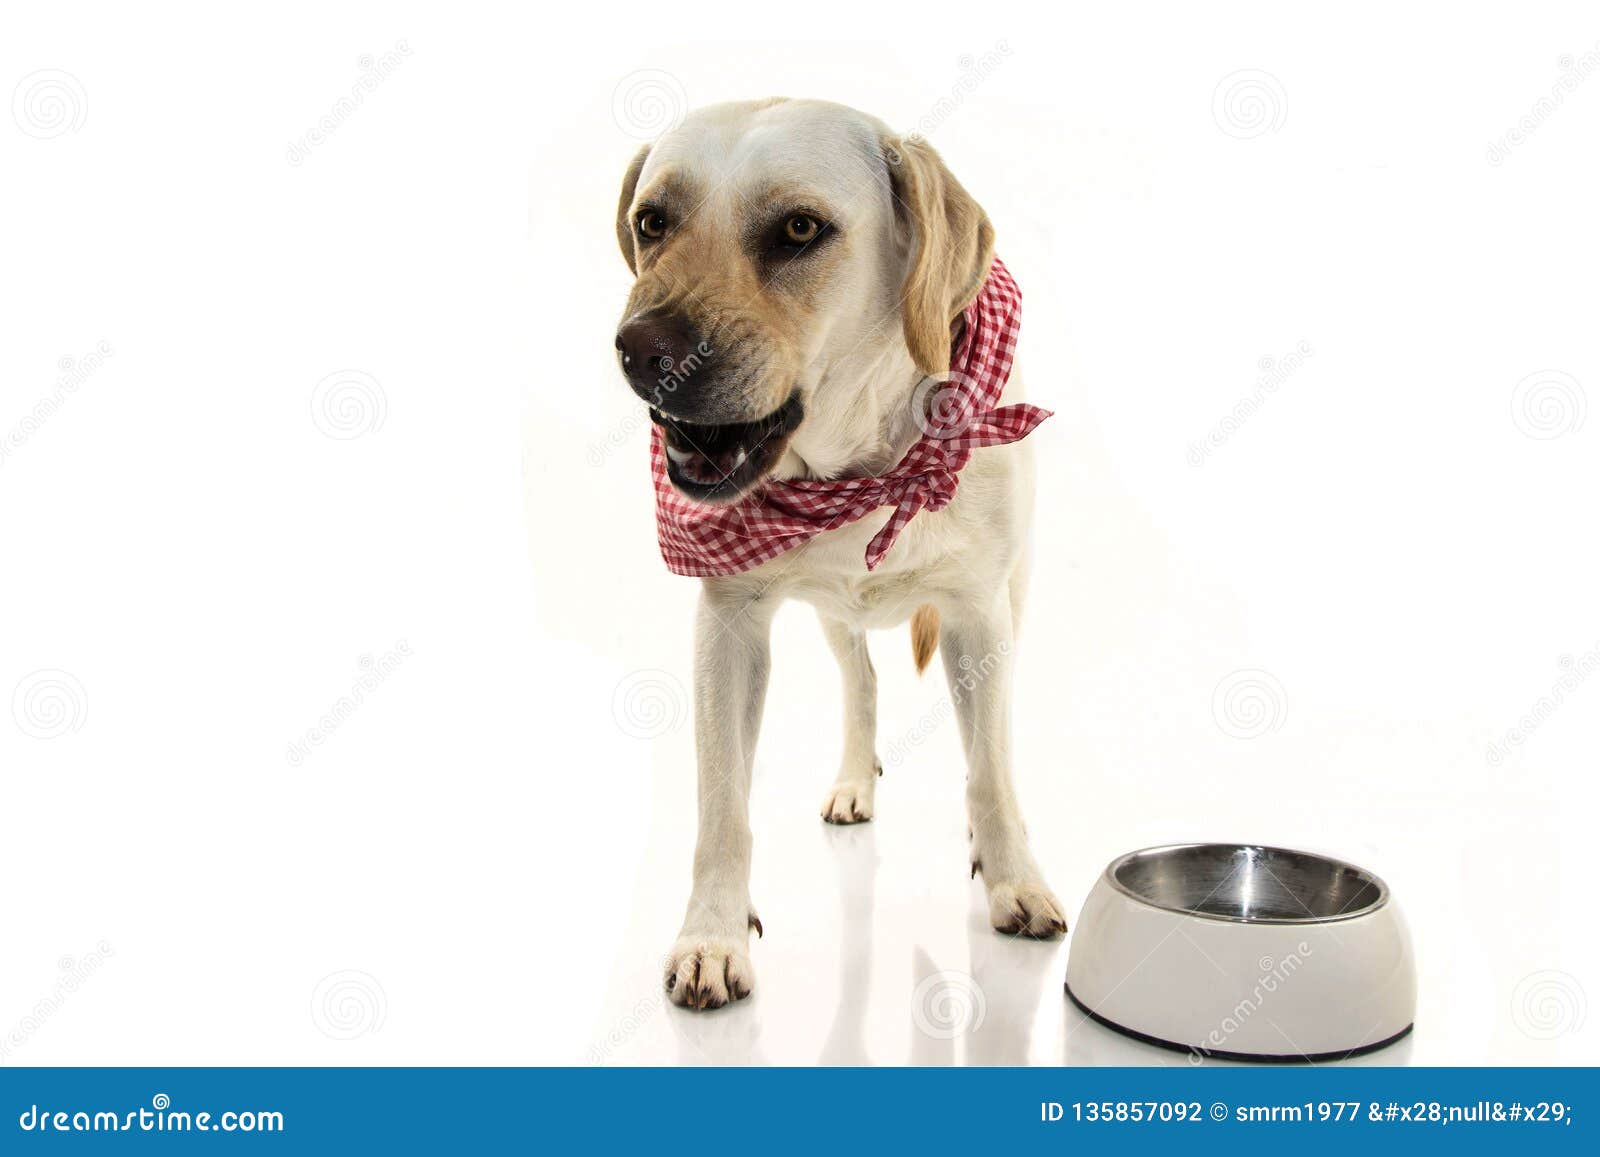 angry dog eating. labrador puppy asking for food or protecting territory by instinct and showing teeth.  shot against